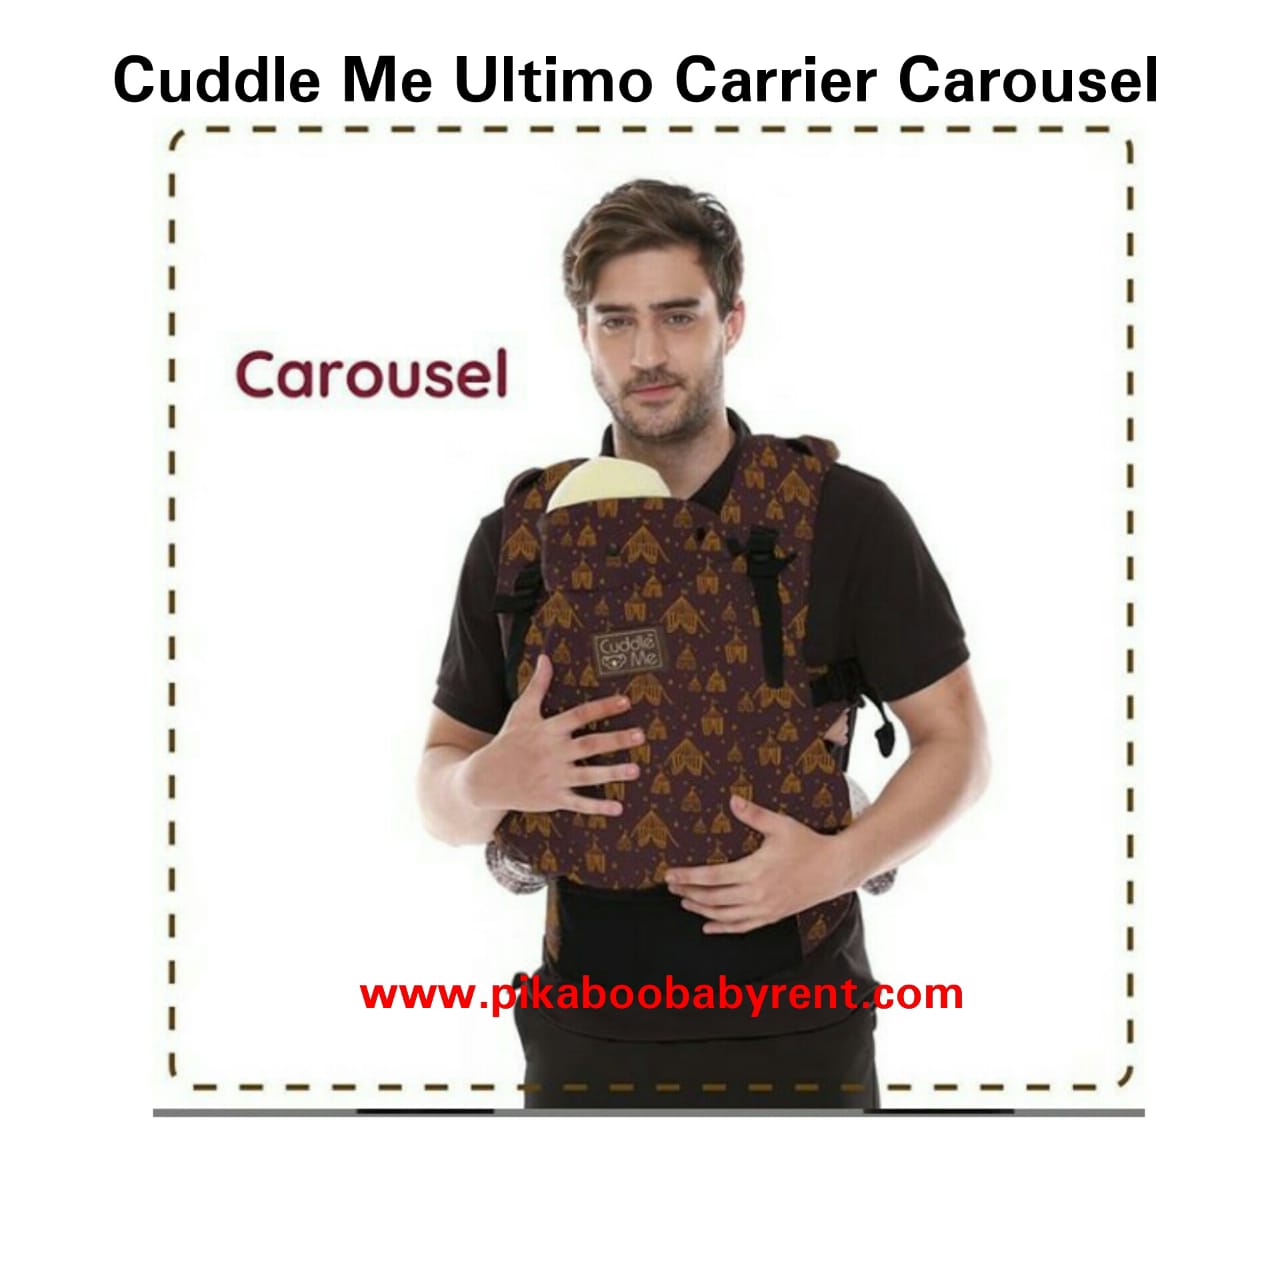 CUDDLE ME CARRIER